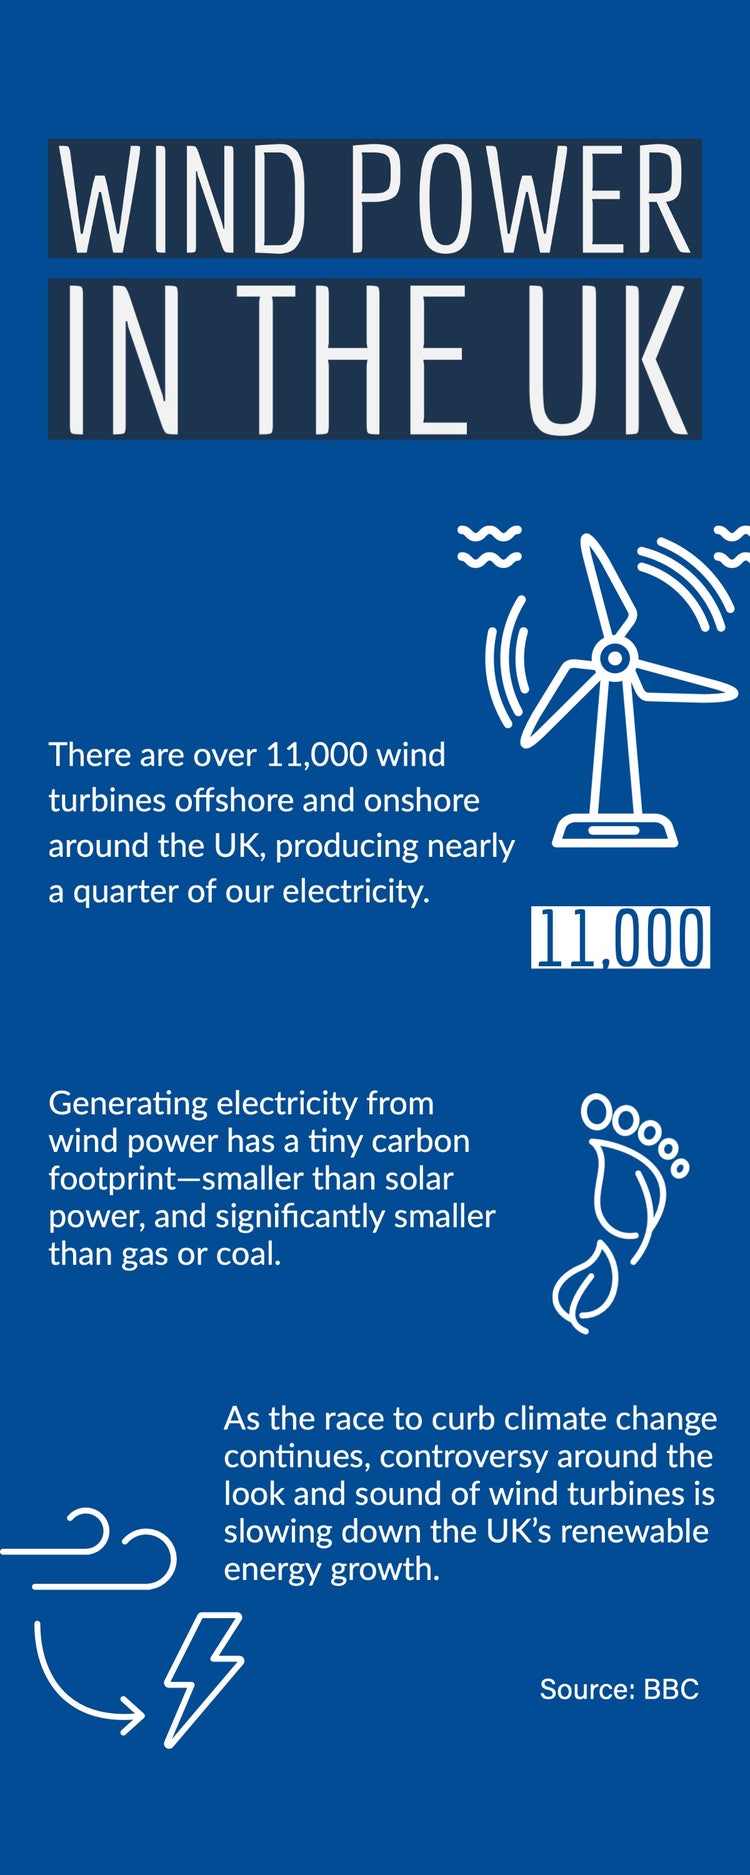 Blue Navy & White Wind Power Illustrated Infographic